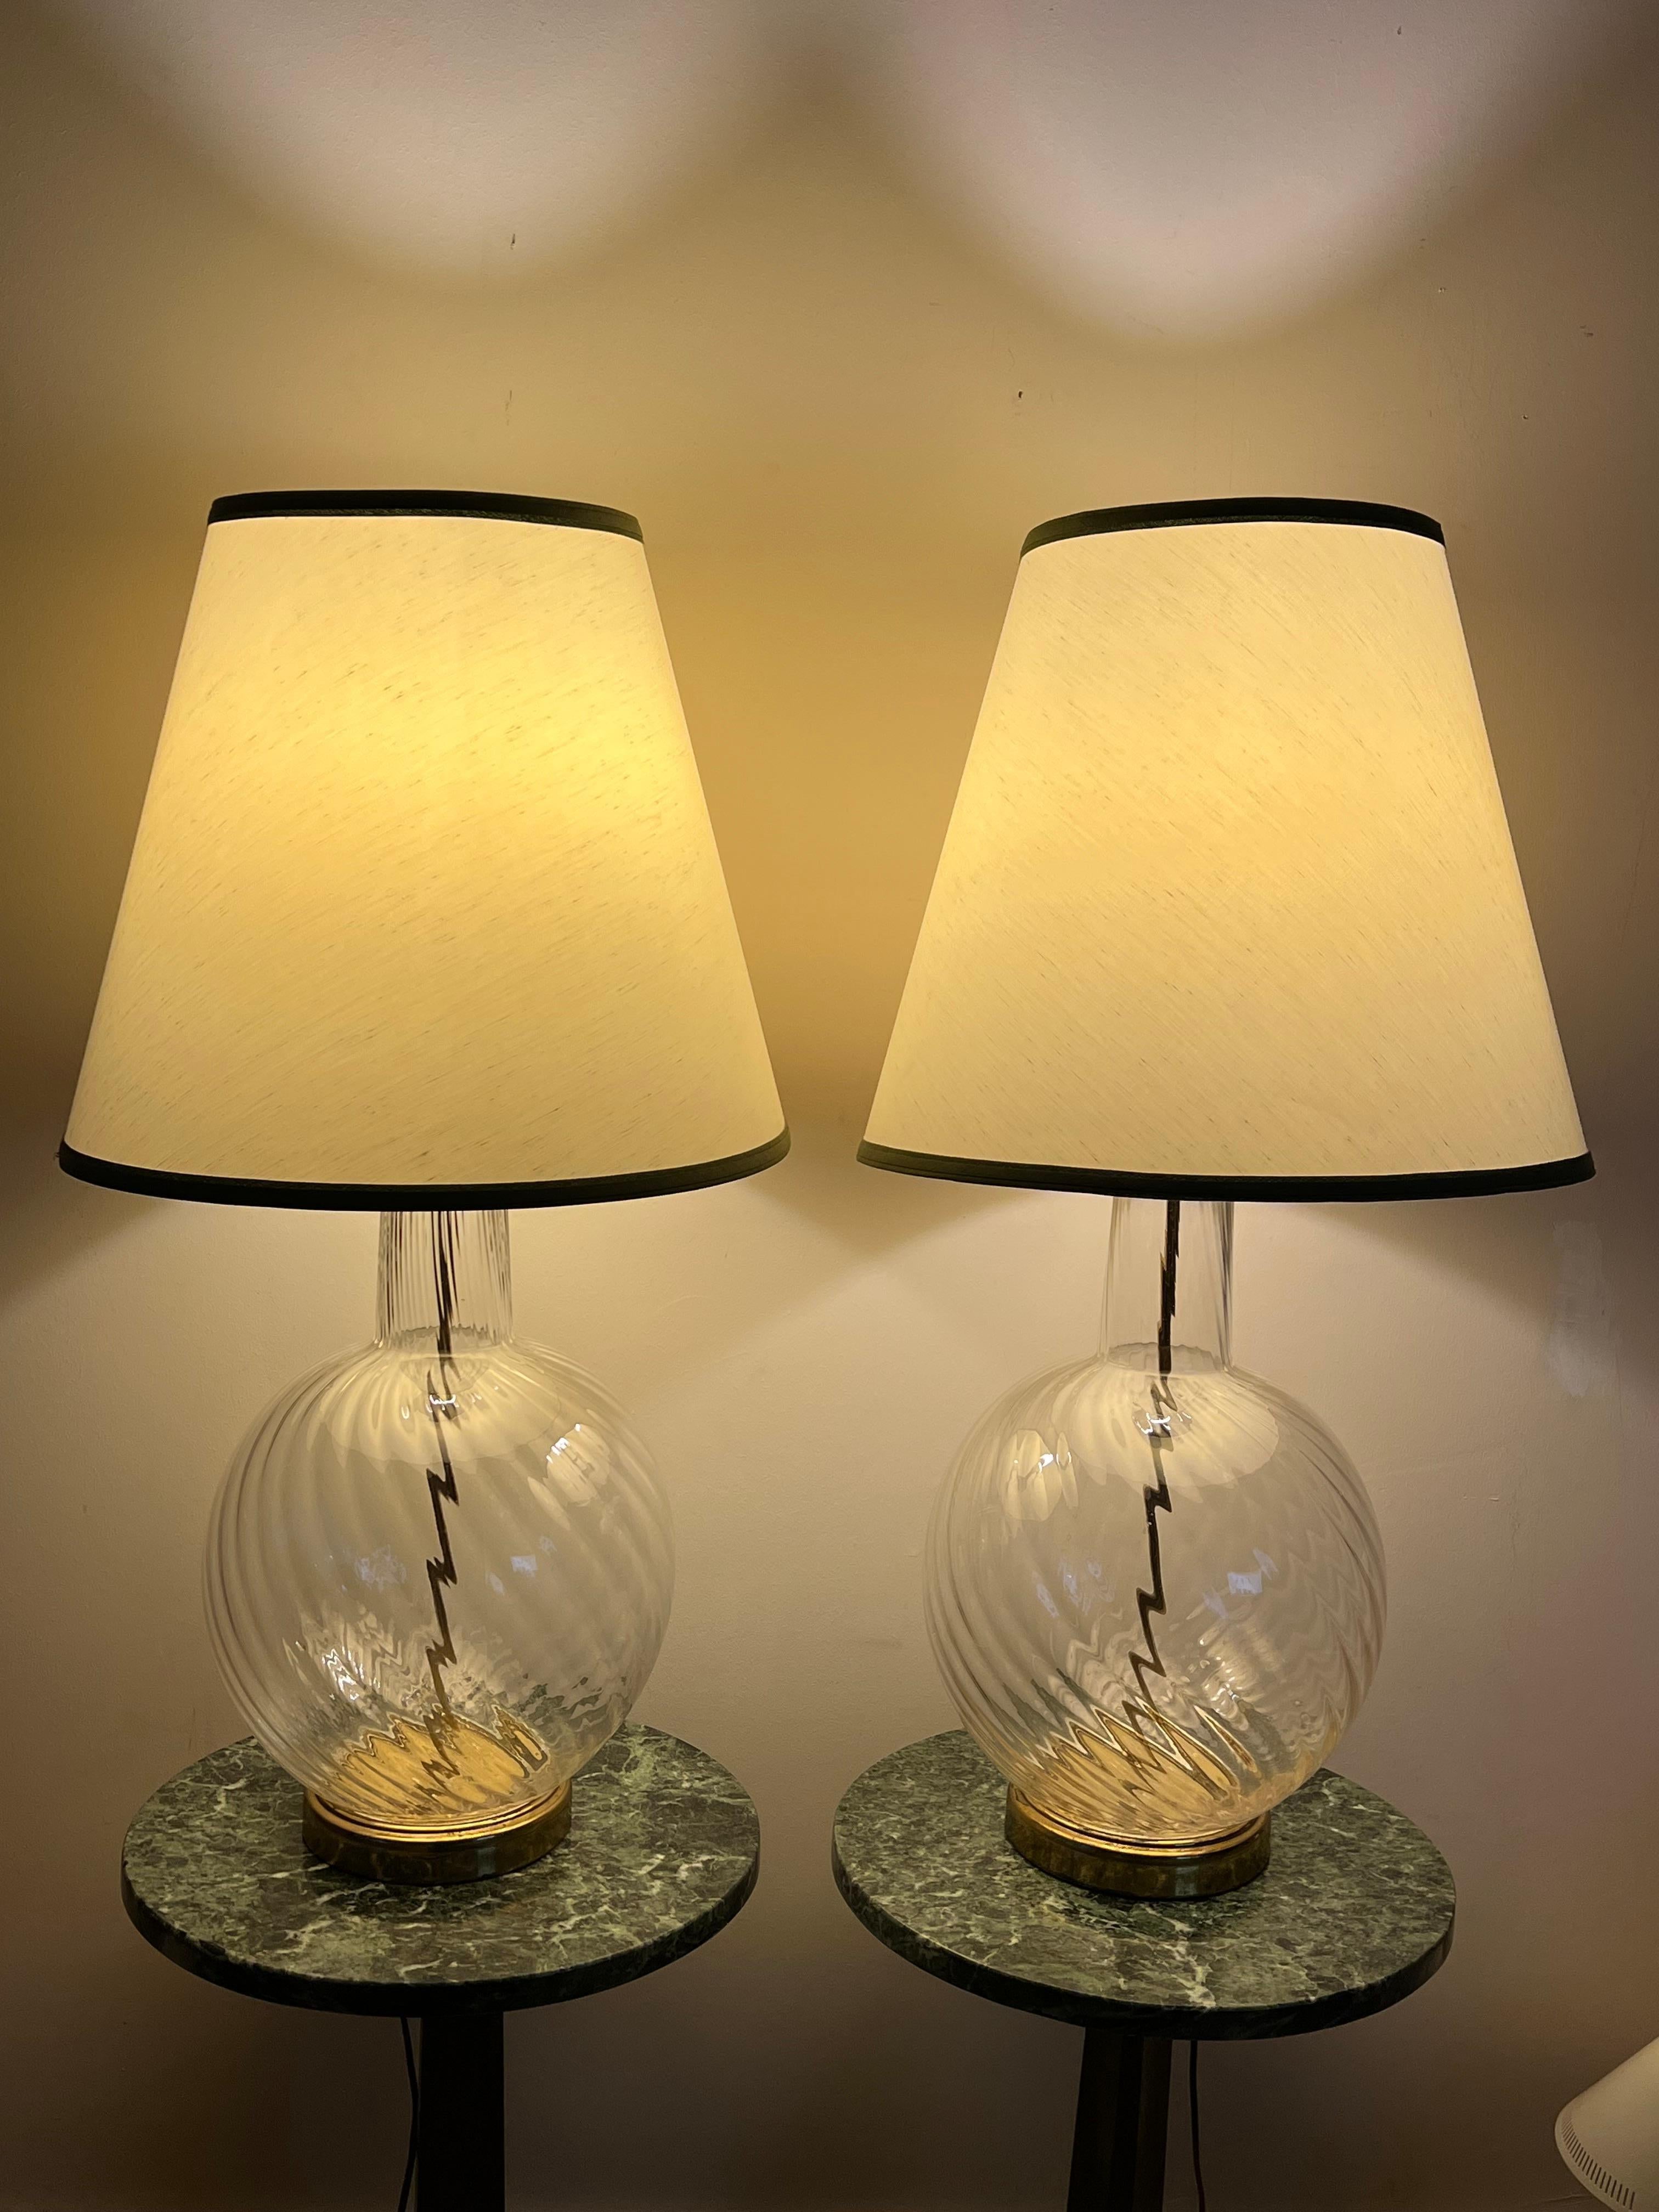 A pair of unusual, large scale clear glass Murano lamps ca' 1960's. Original brass fittings. Total height with shades 34